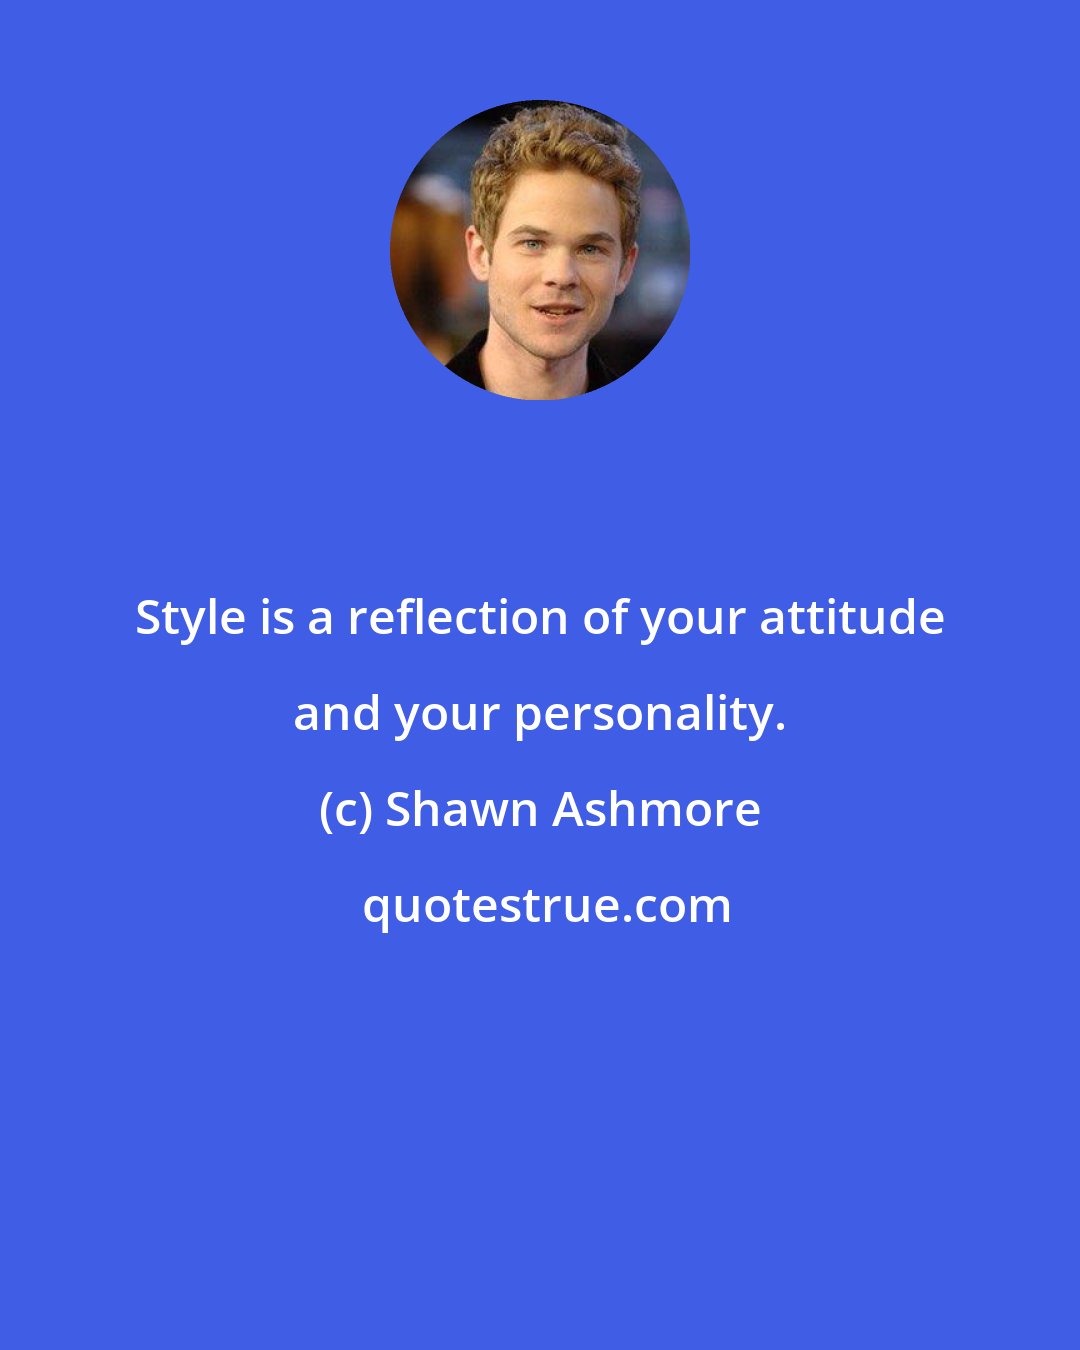 Shawn Ashmore: Style is a reflection of your attitude and your personality.